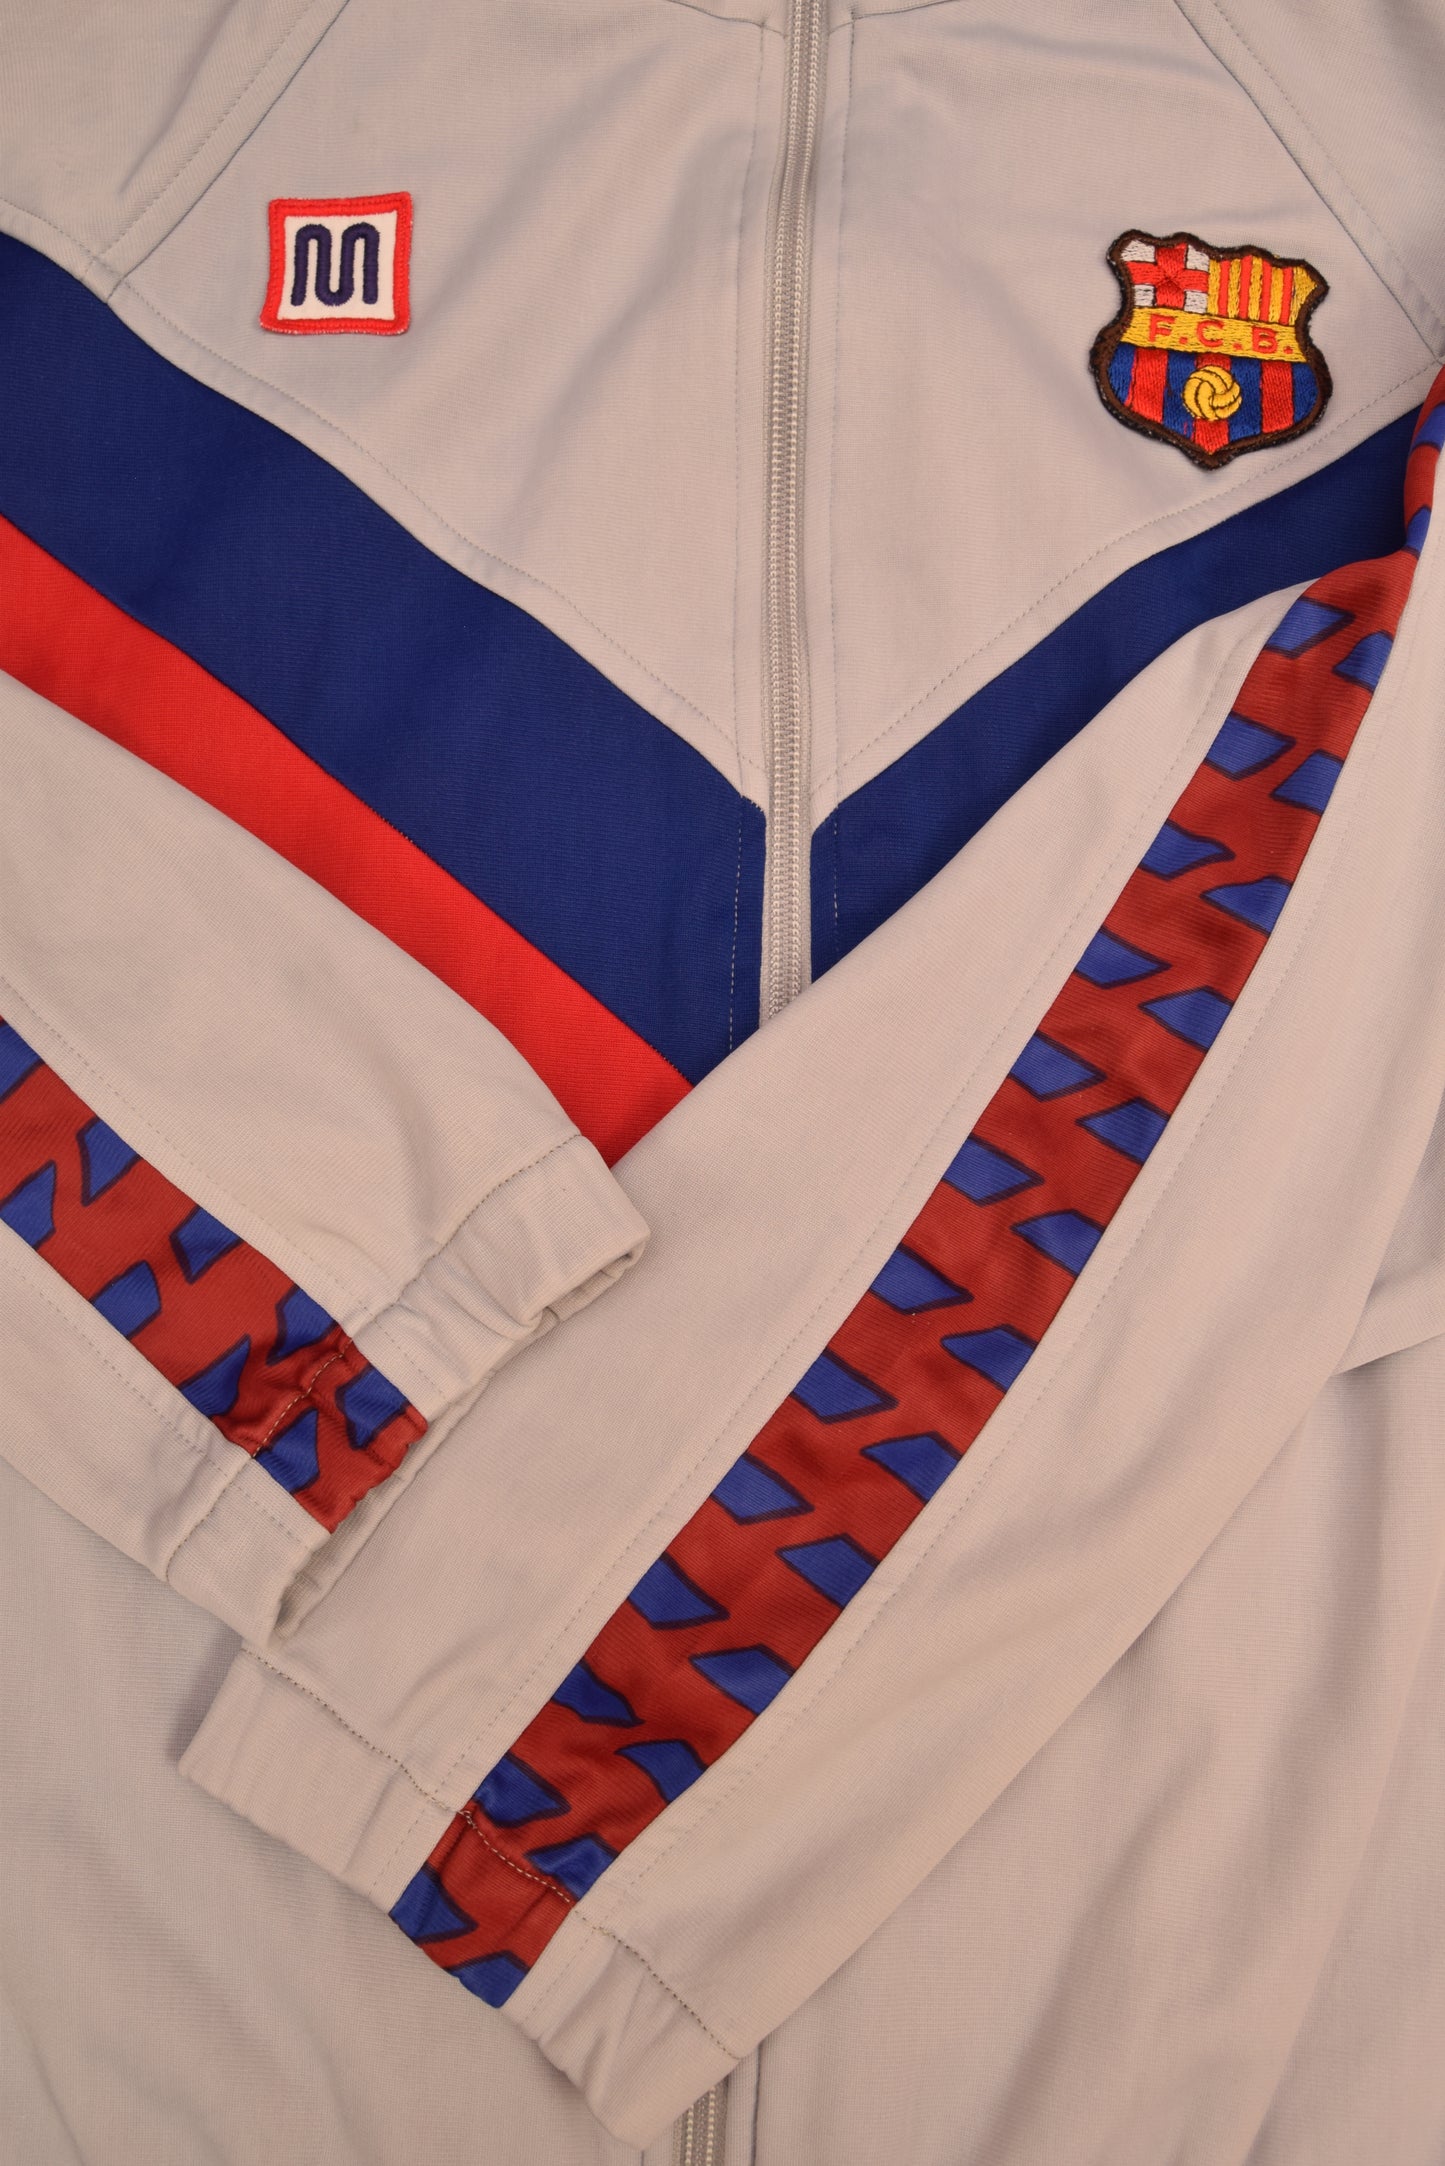 FC Barcelona Meyba 1984-1989 Jacket Size Grey Red Blue Made in Spain Size L-XL